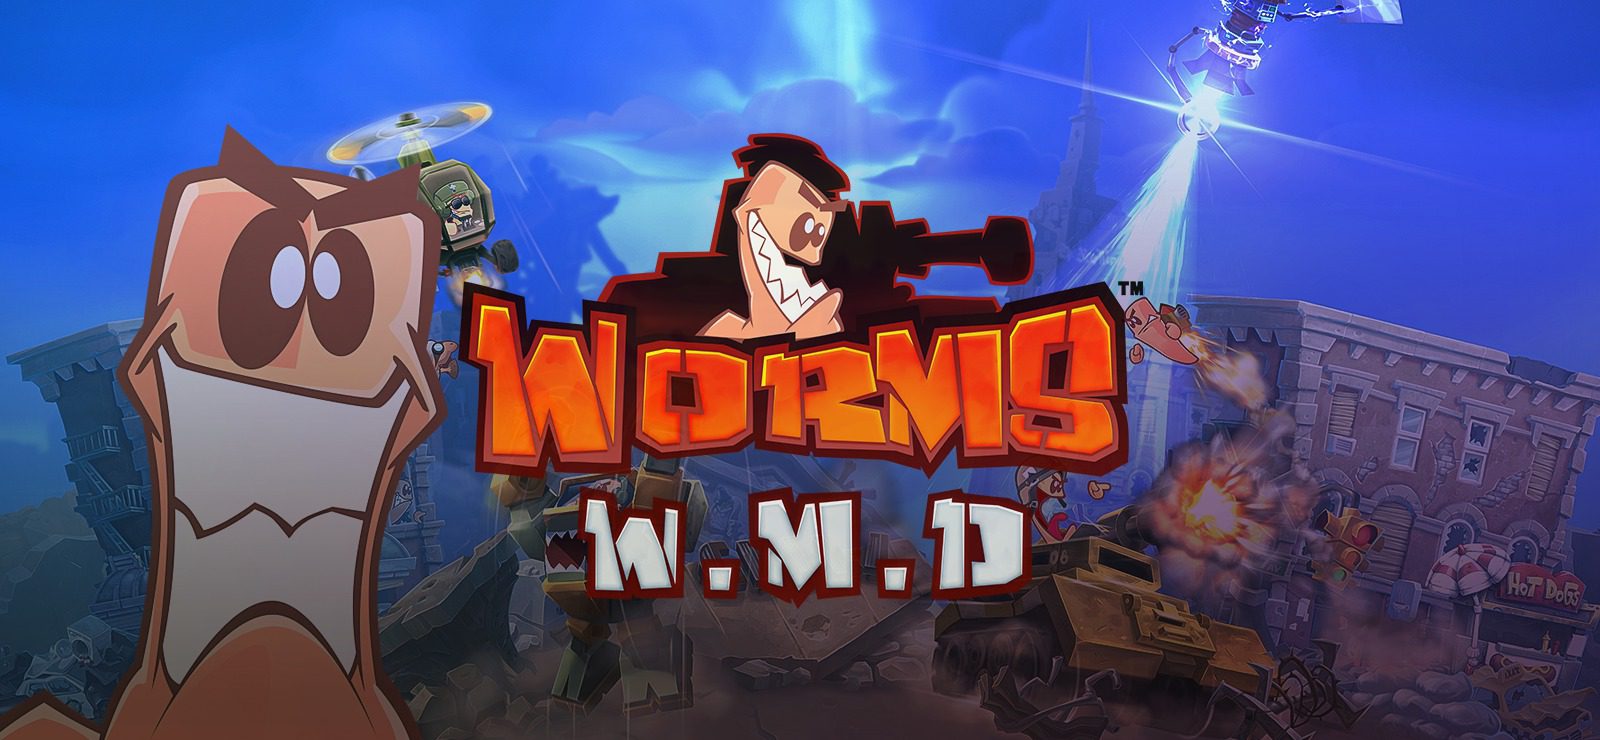 Engage in all out Worm-Warfare as Worms W.M.D comes to the Switch